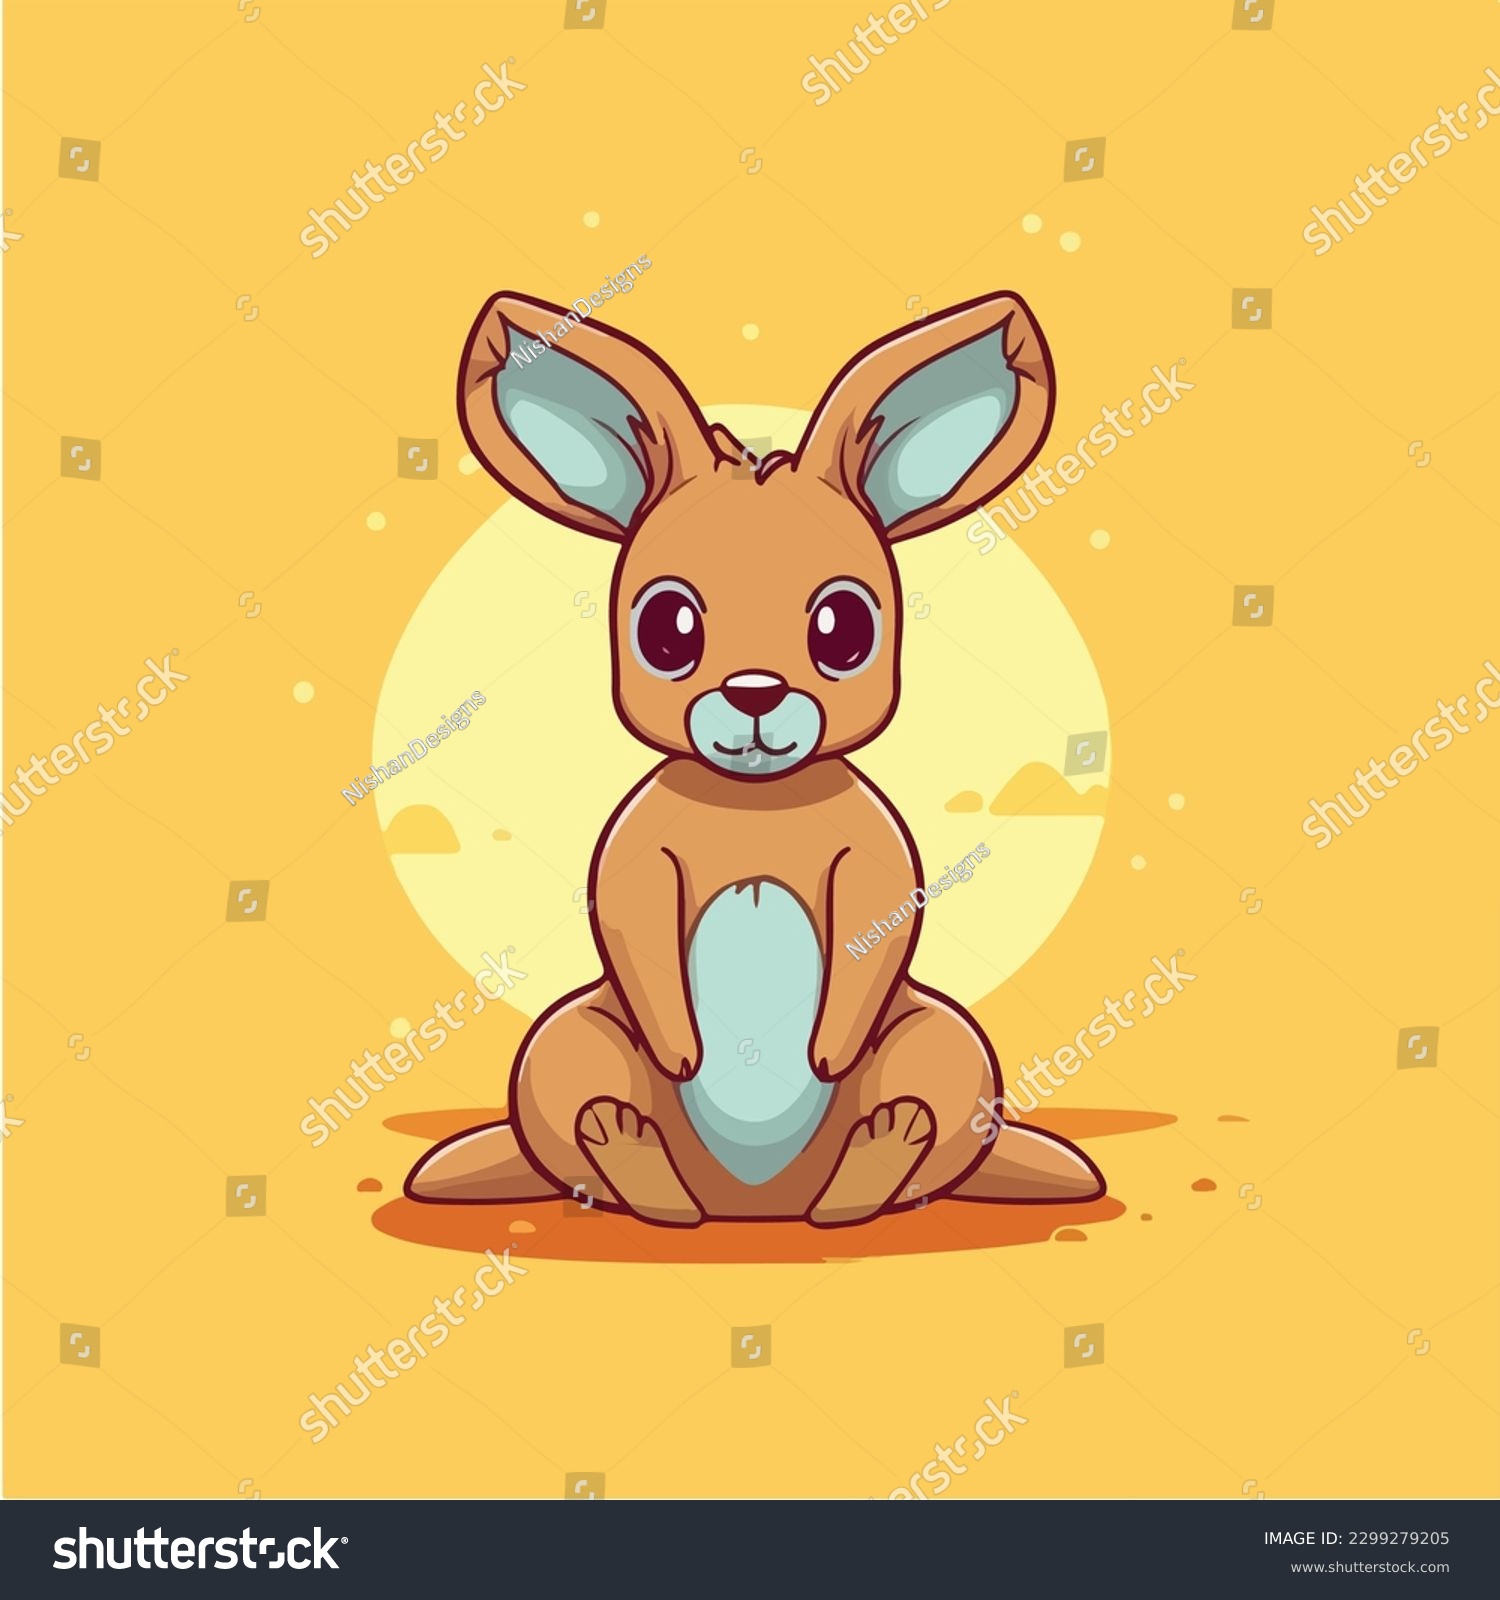 SVG of A cartoon of a kangaroo sitting on a blue background. svg